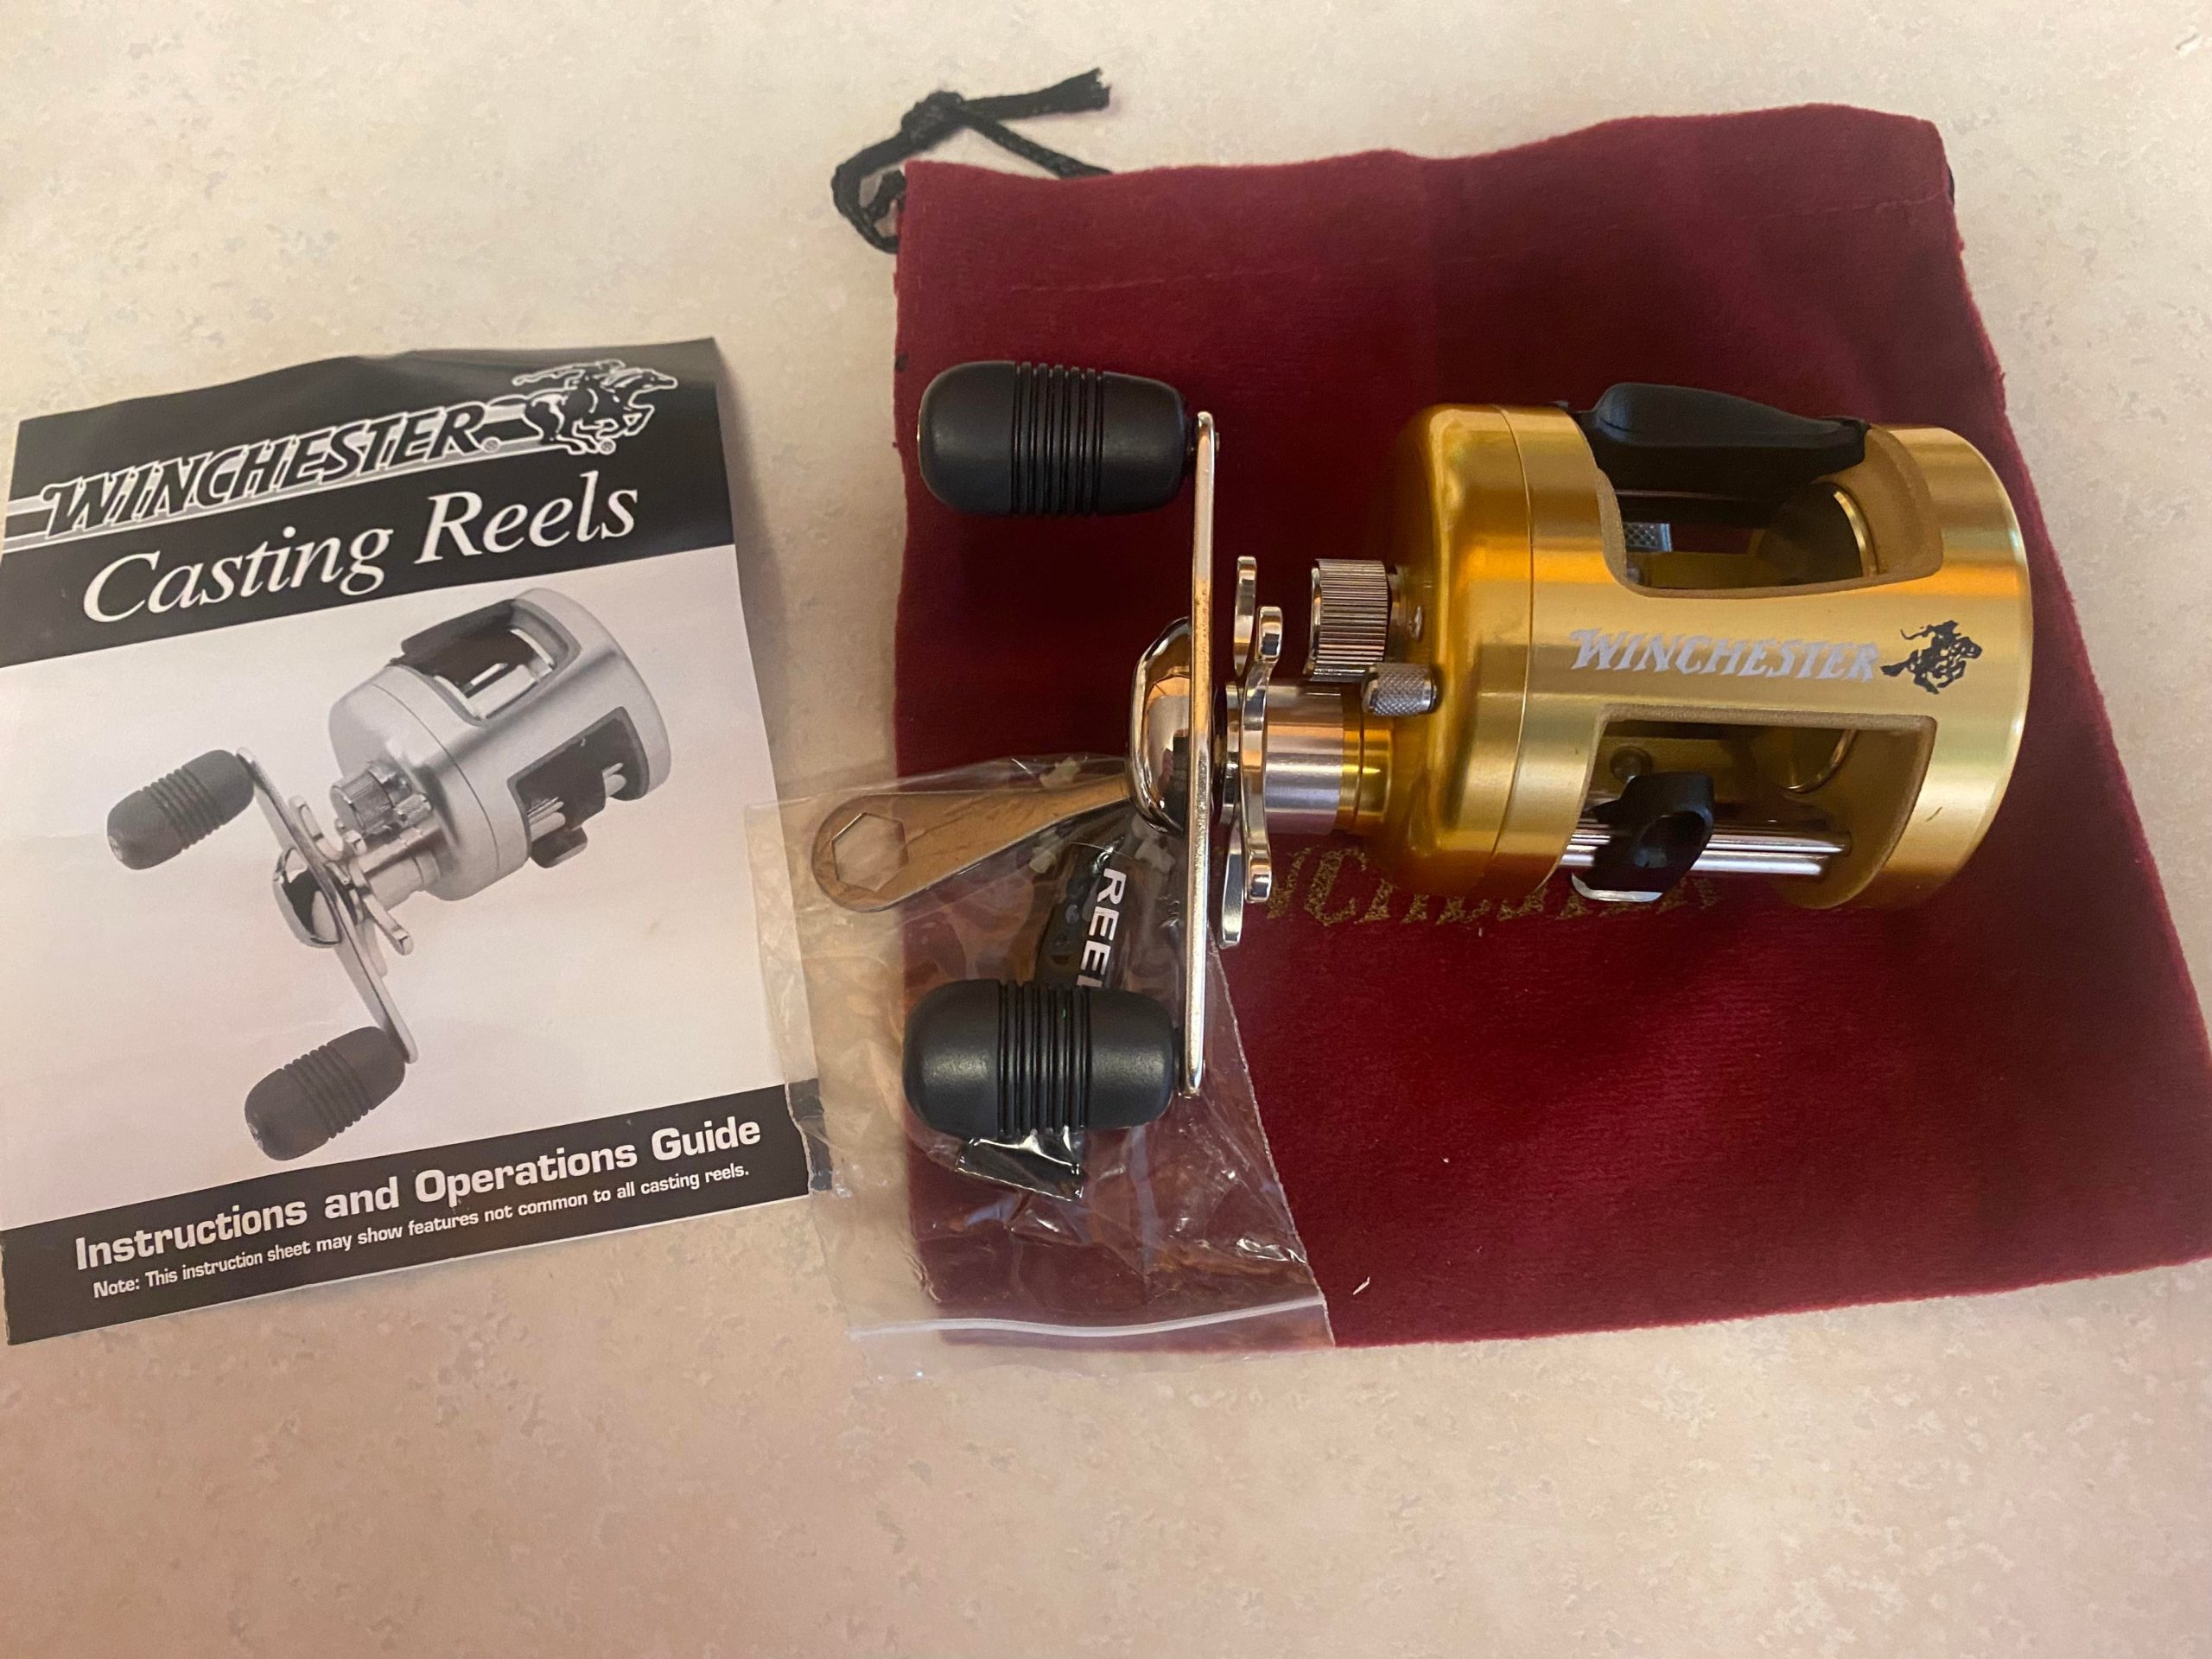 Anyone seen these reels by Winchester before? - General Discussion Forum -  General Discussion Forum